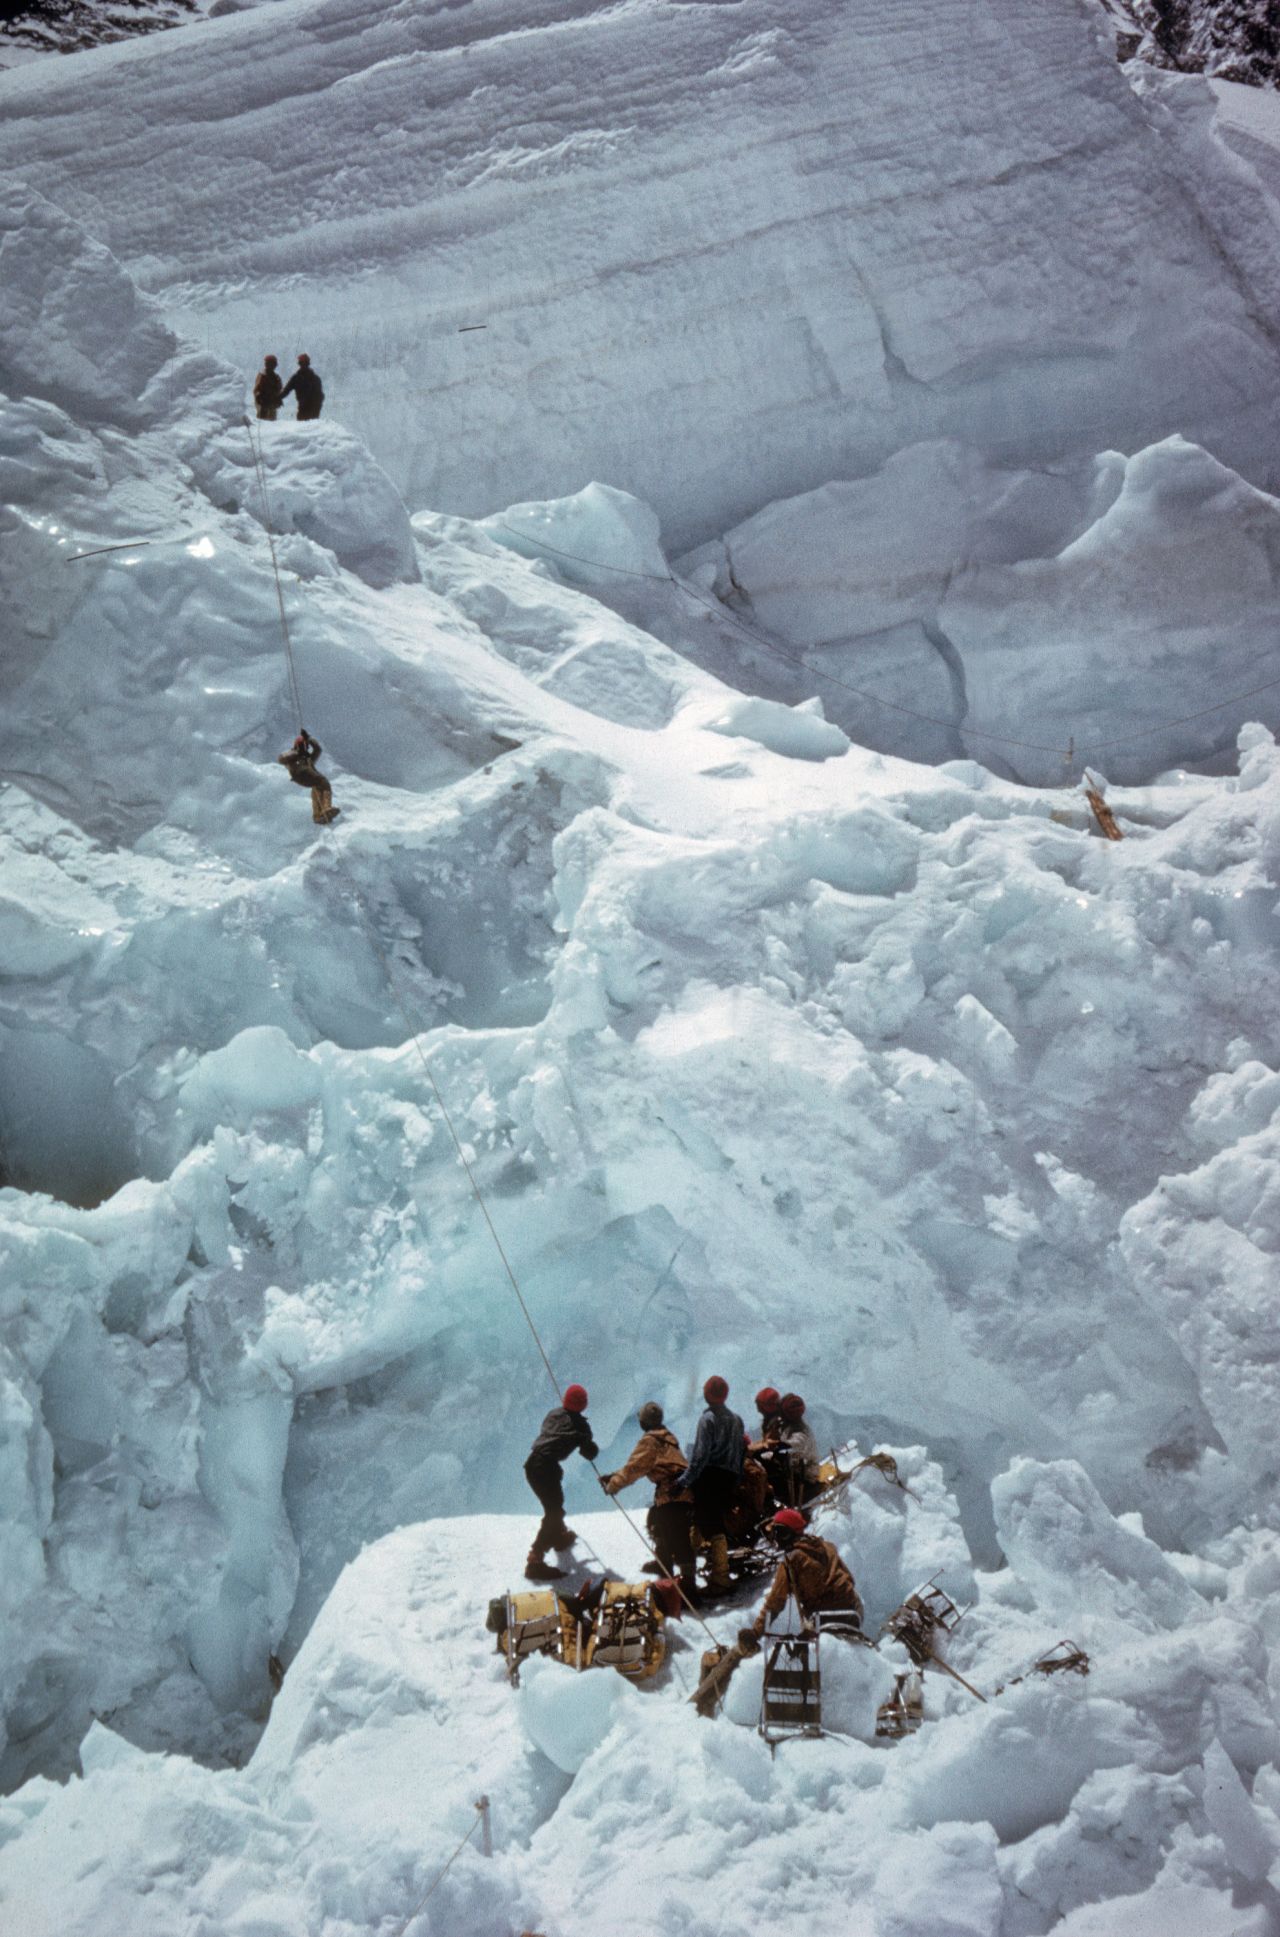 Climbers work their way through the dangerous Khumbu Icefall, a shedding glacier just after Everest base camp.